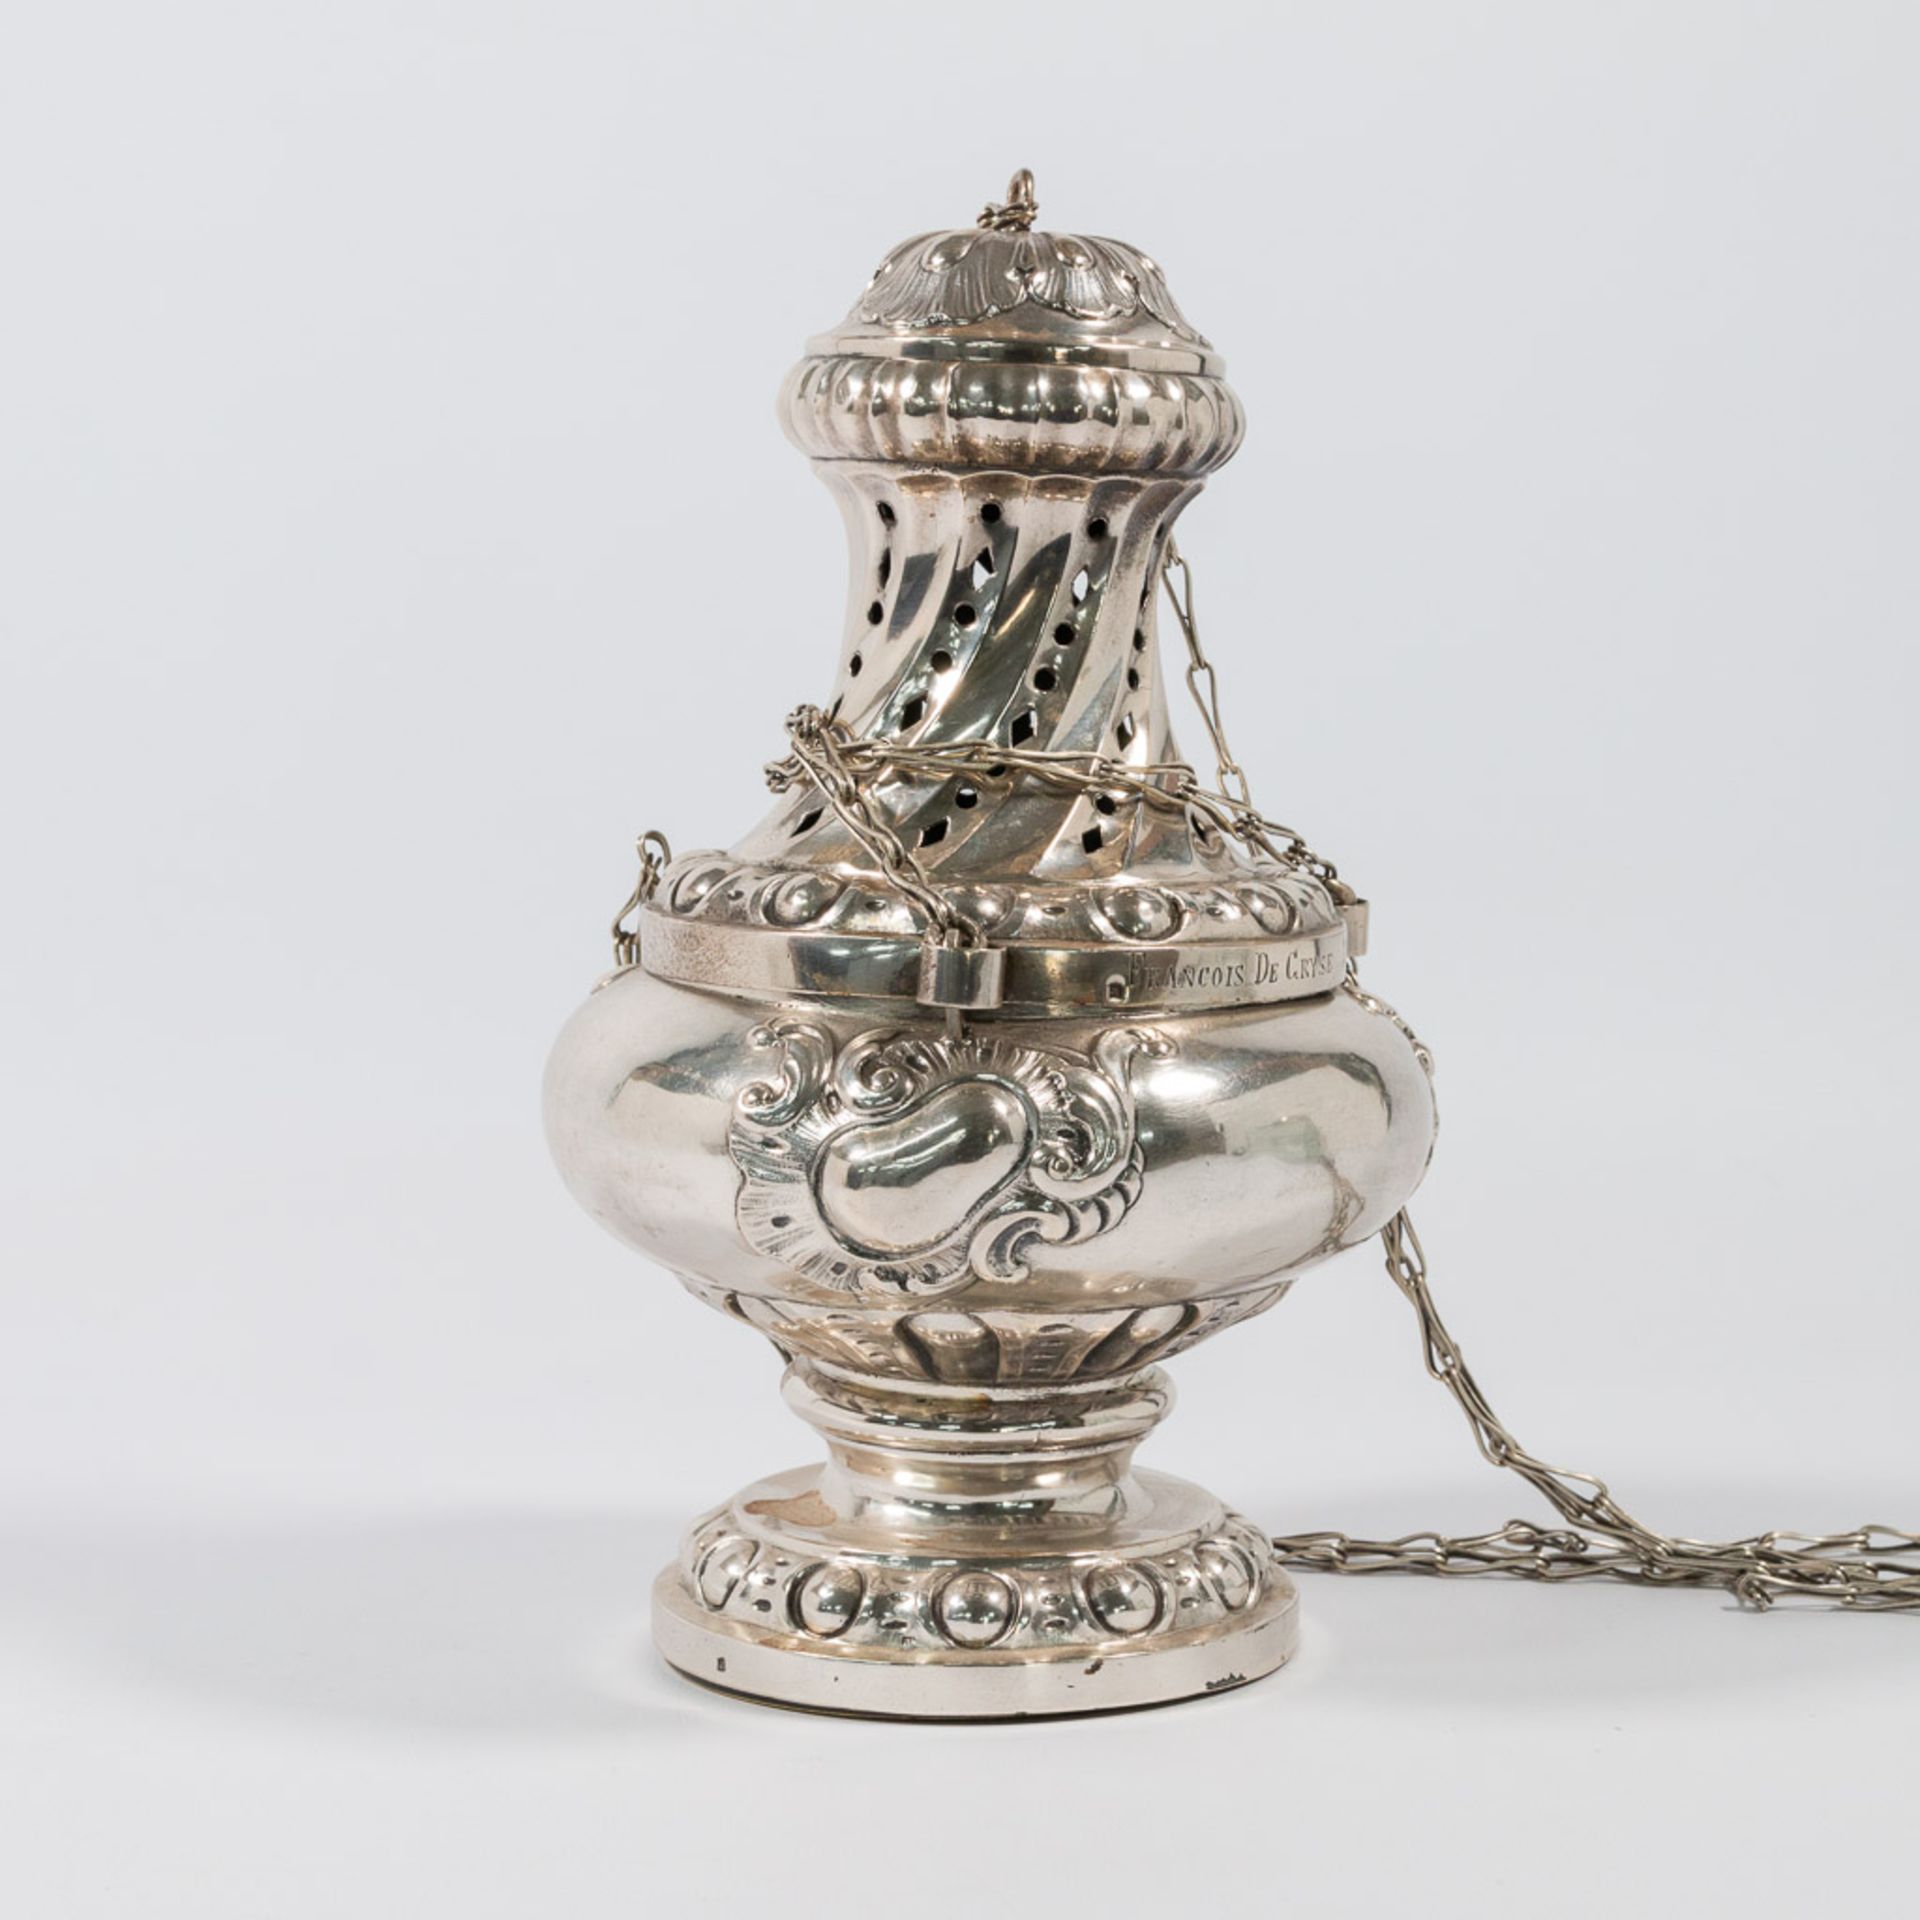 A silver Insence burner and Insence jar. - Image 16 of 39